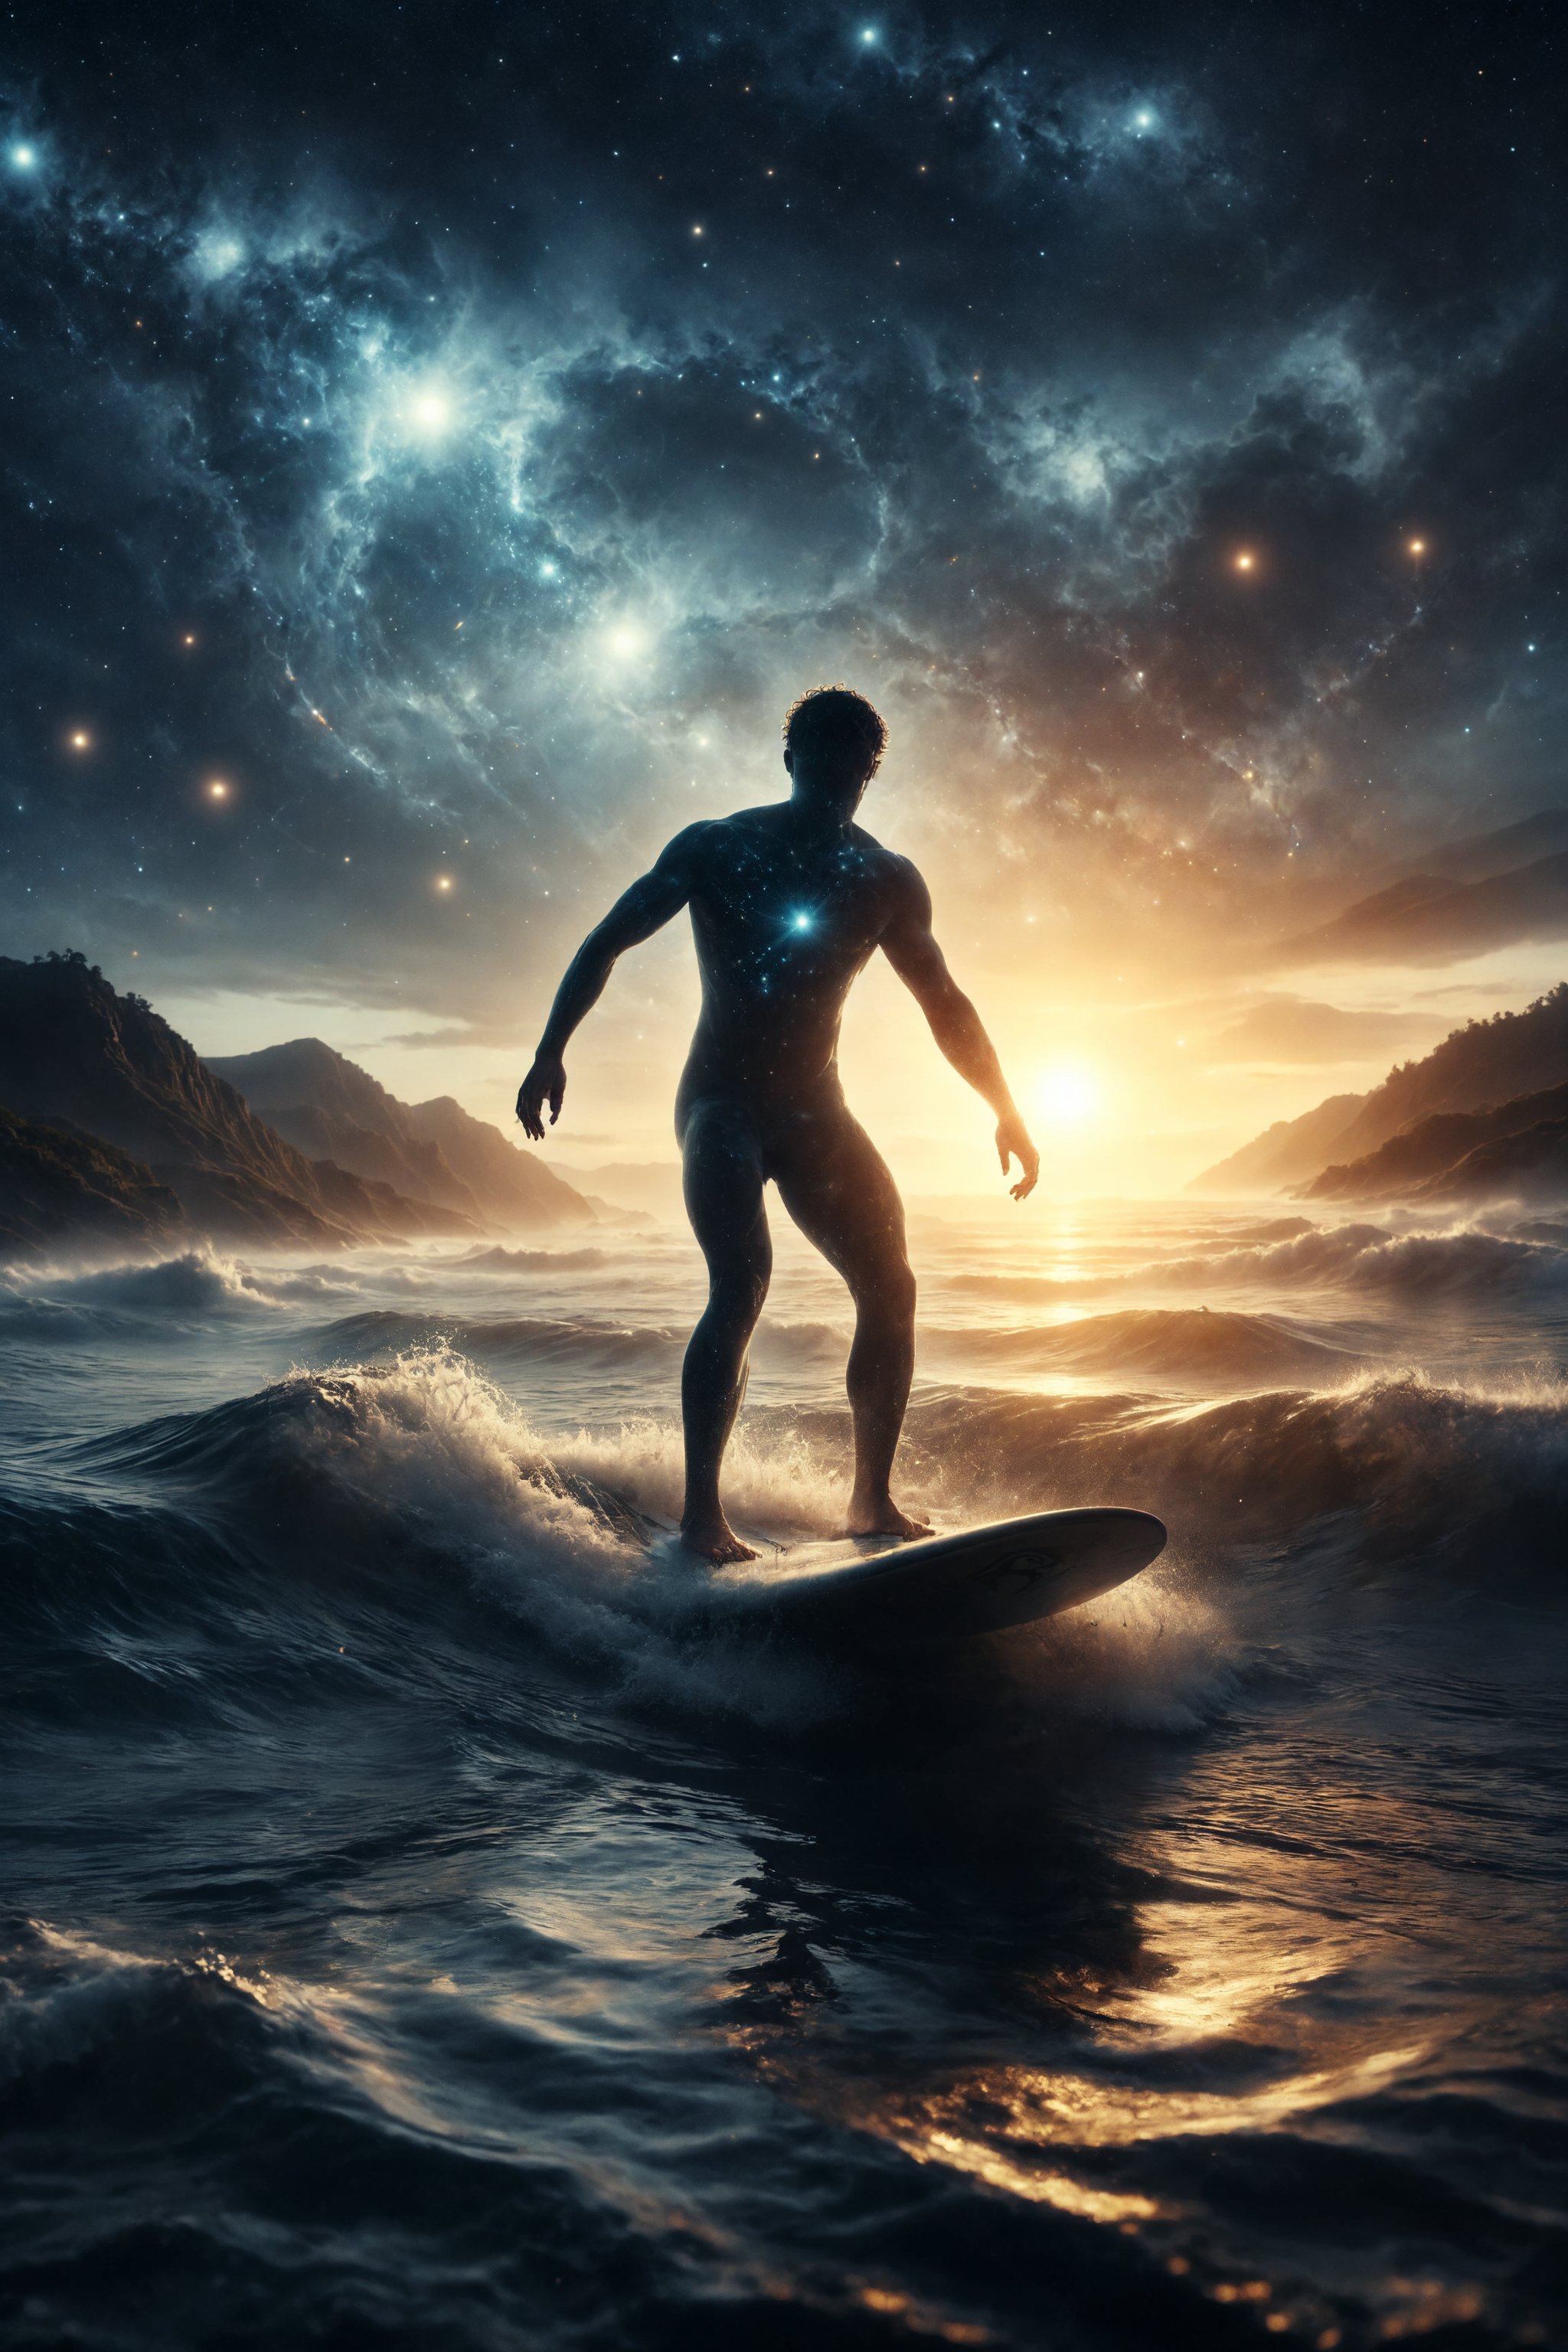 Design a scene of a person surfing on waves of light in a nighttime ocean, with constellations reflecting in the water.